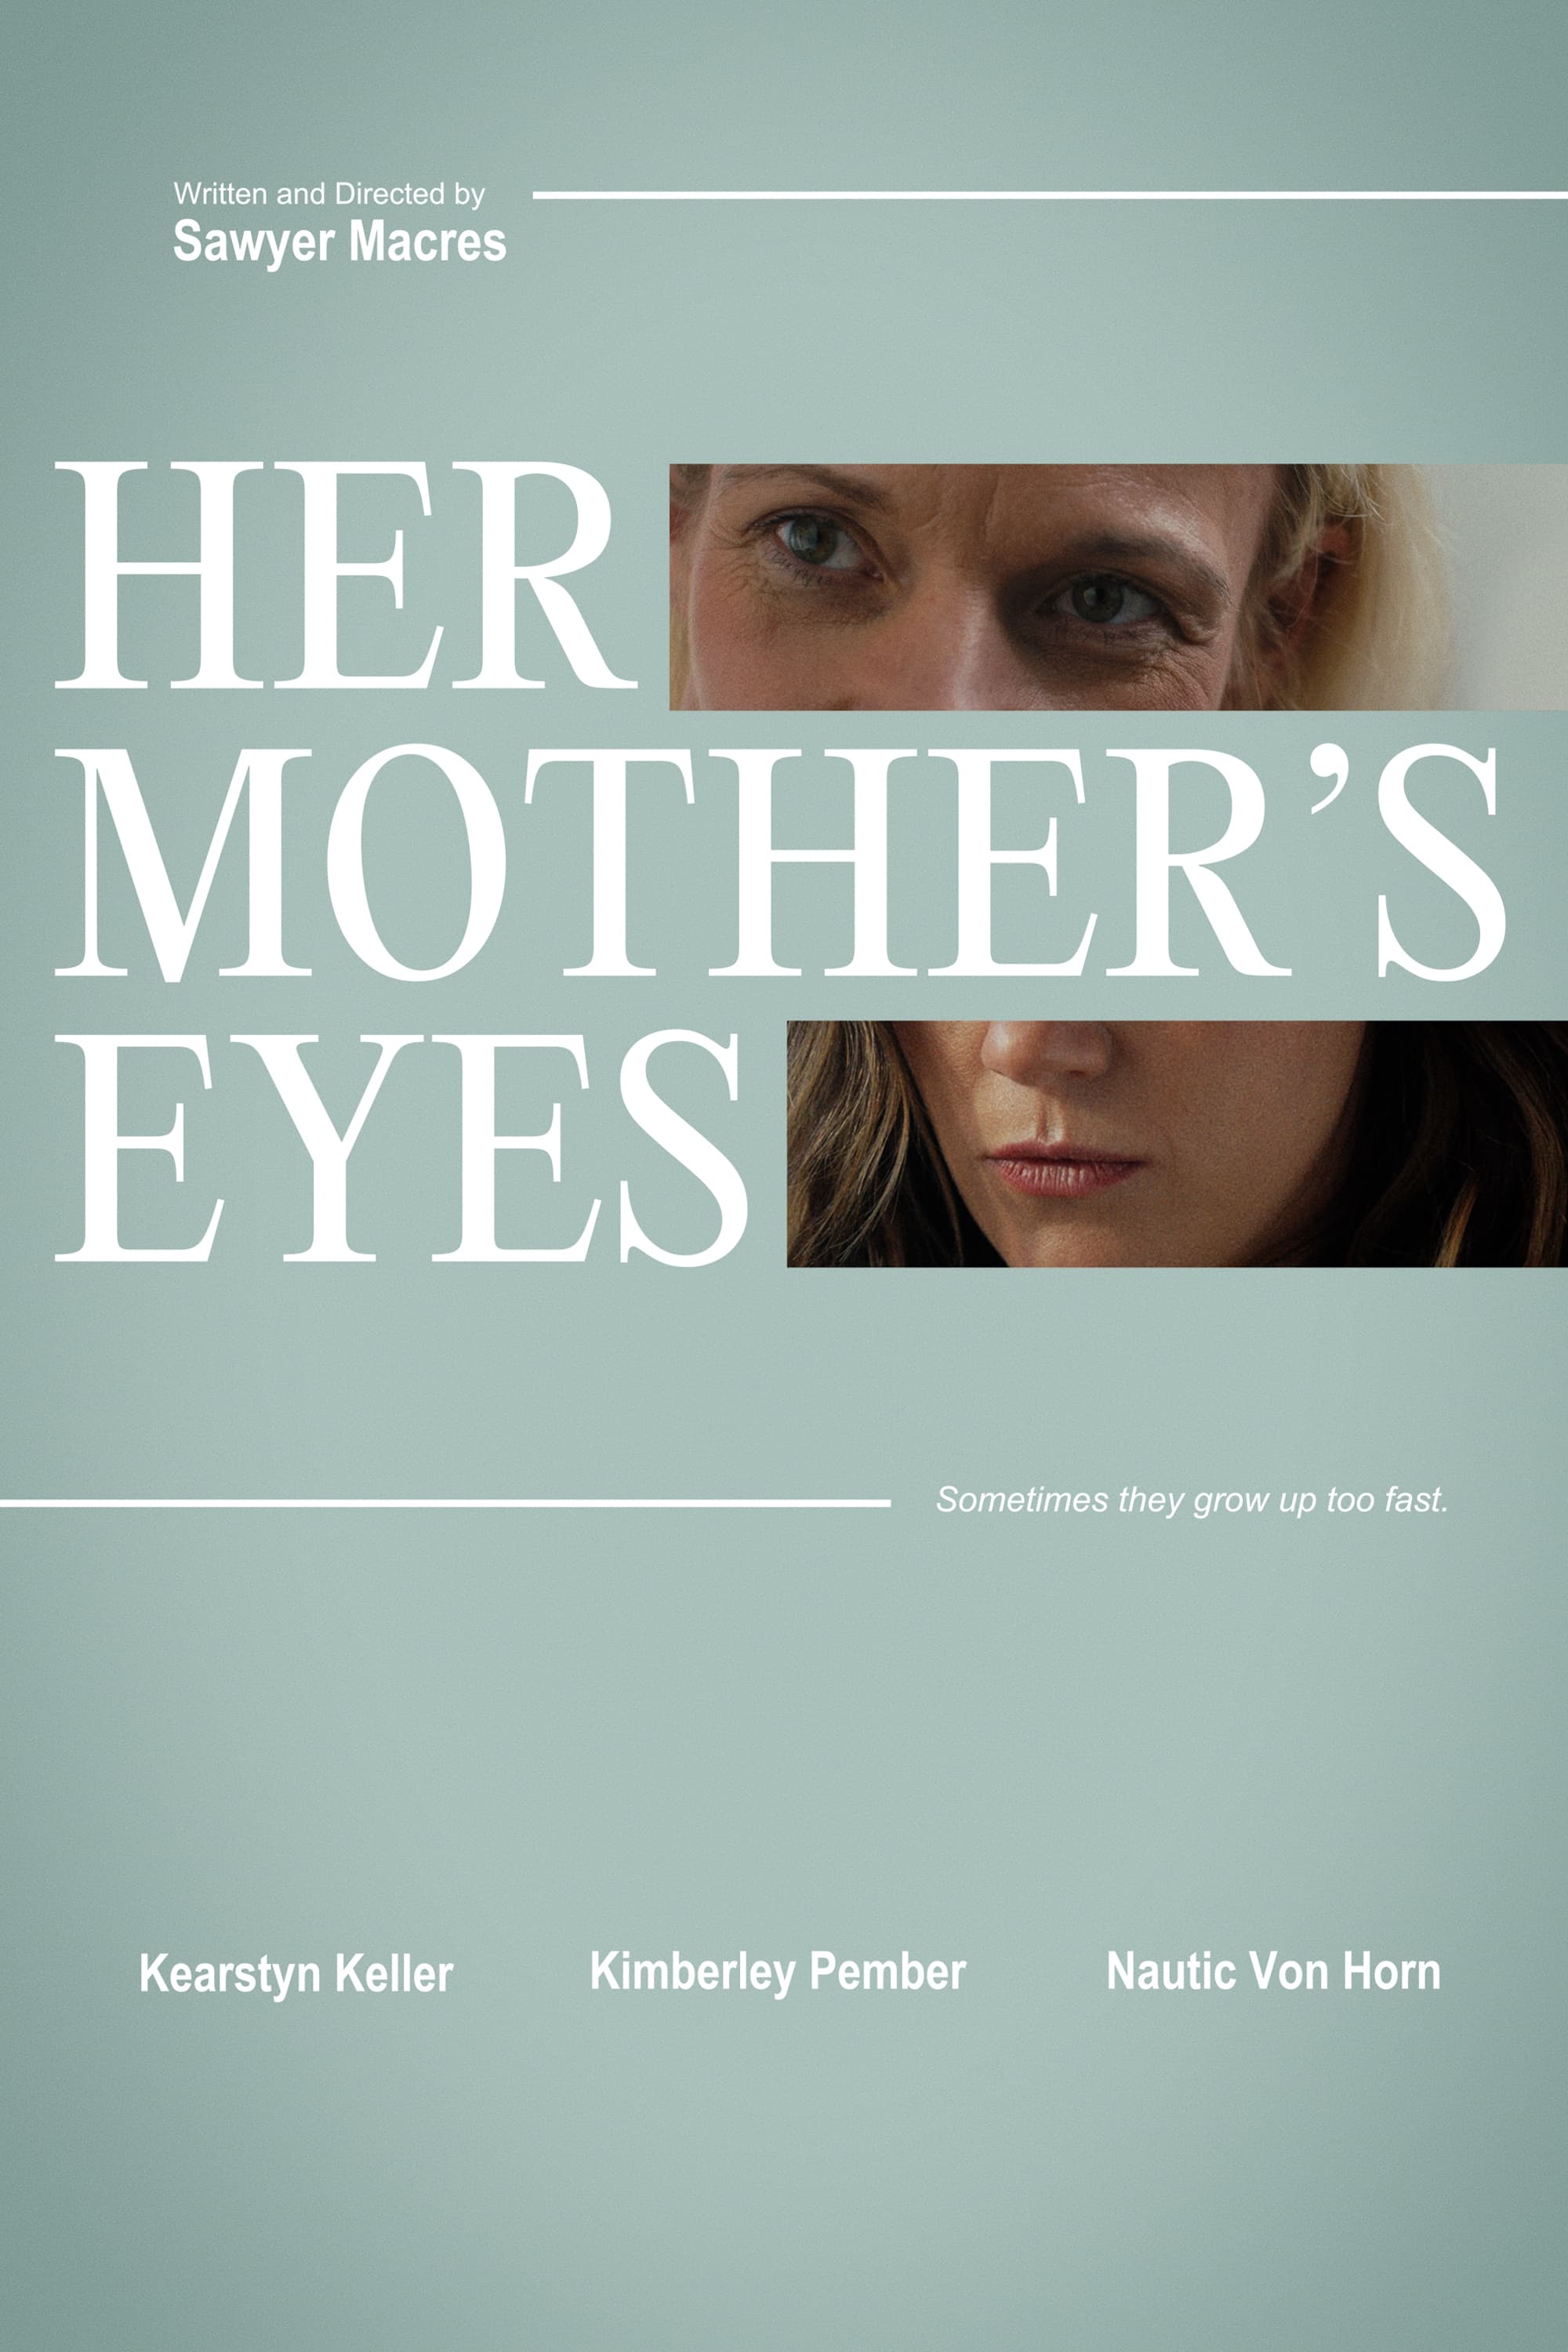 Her Mother's Eyes